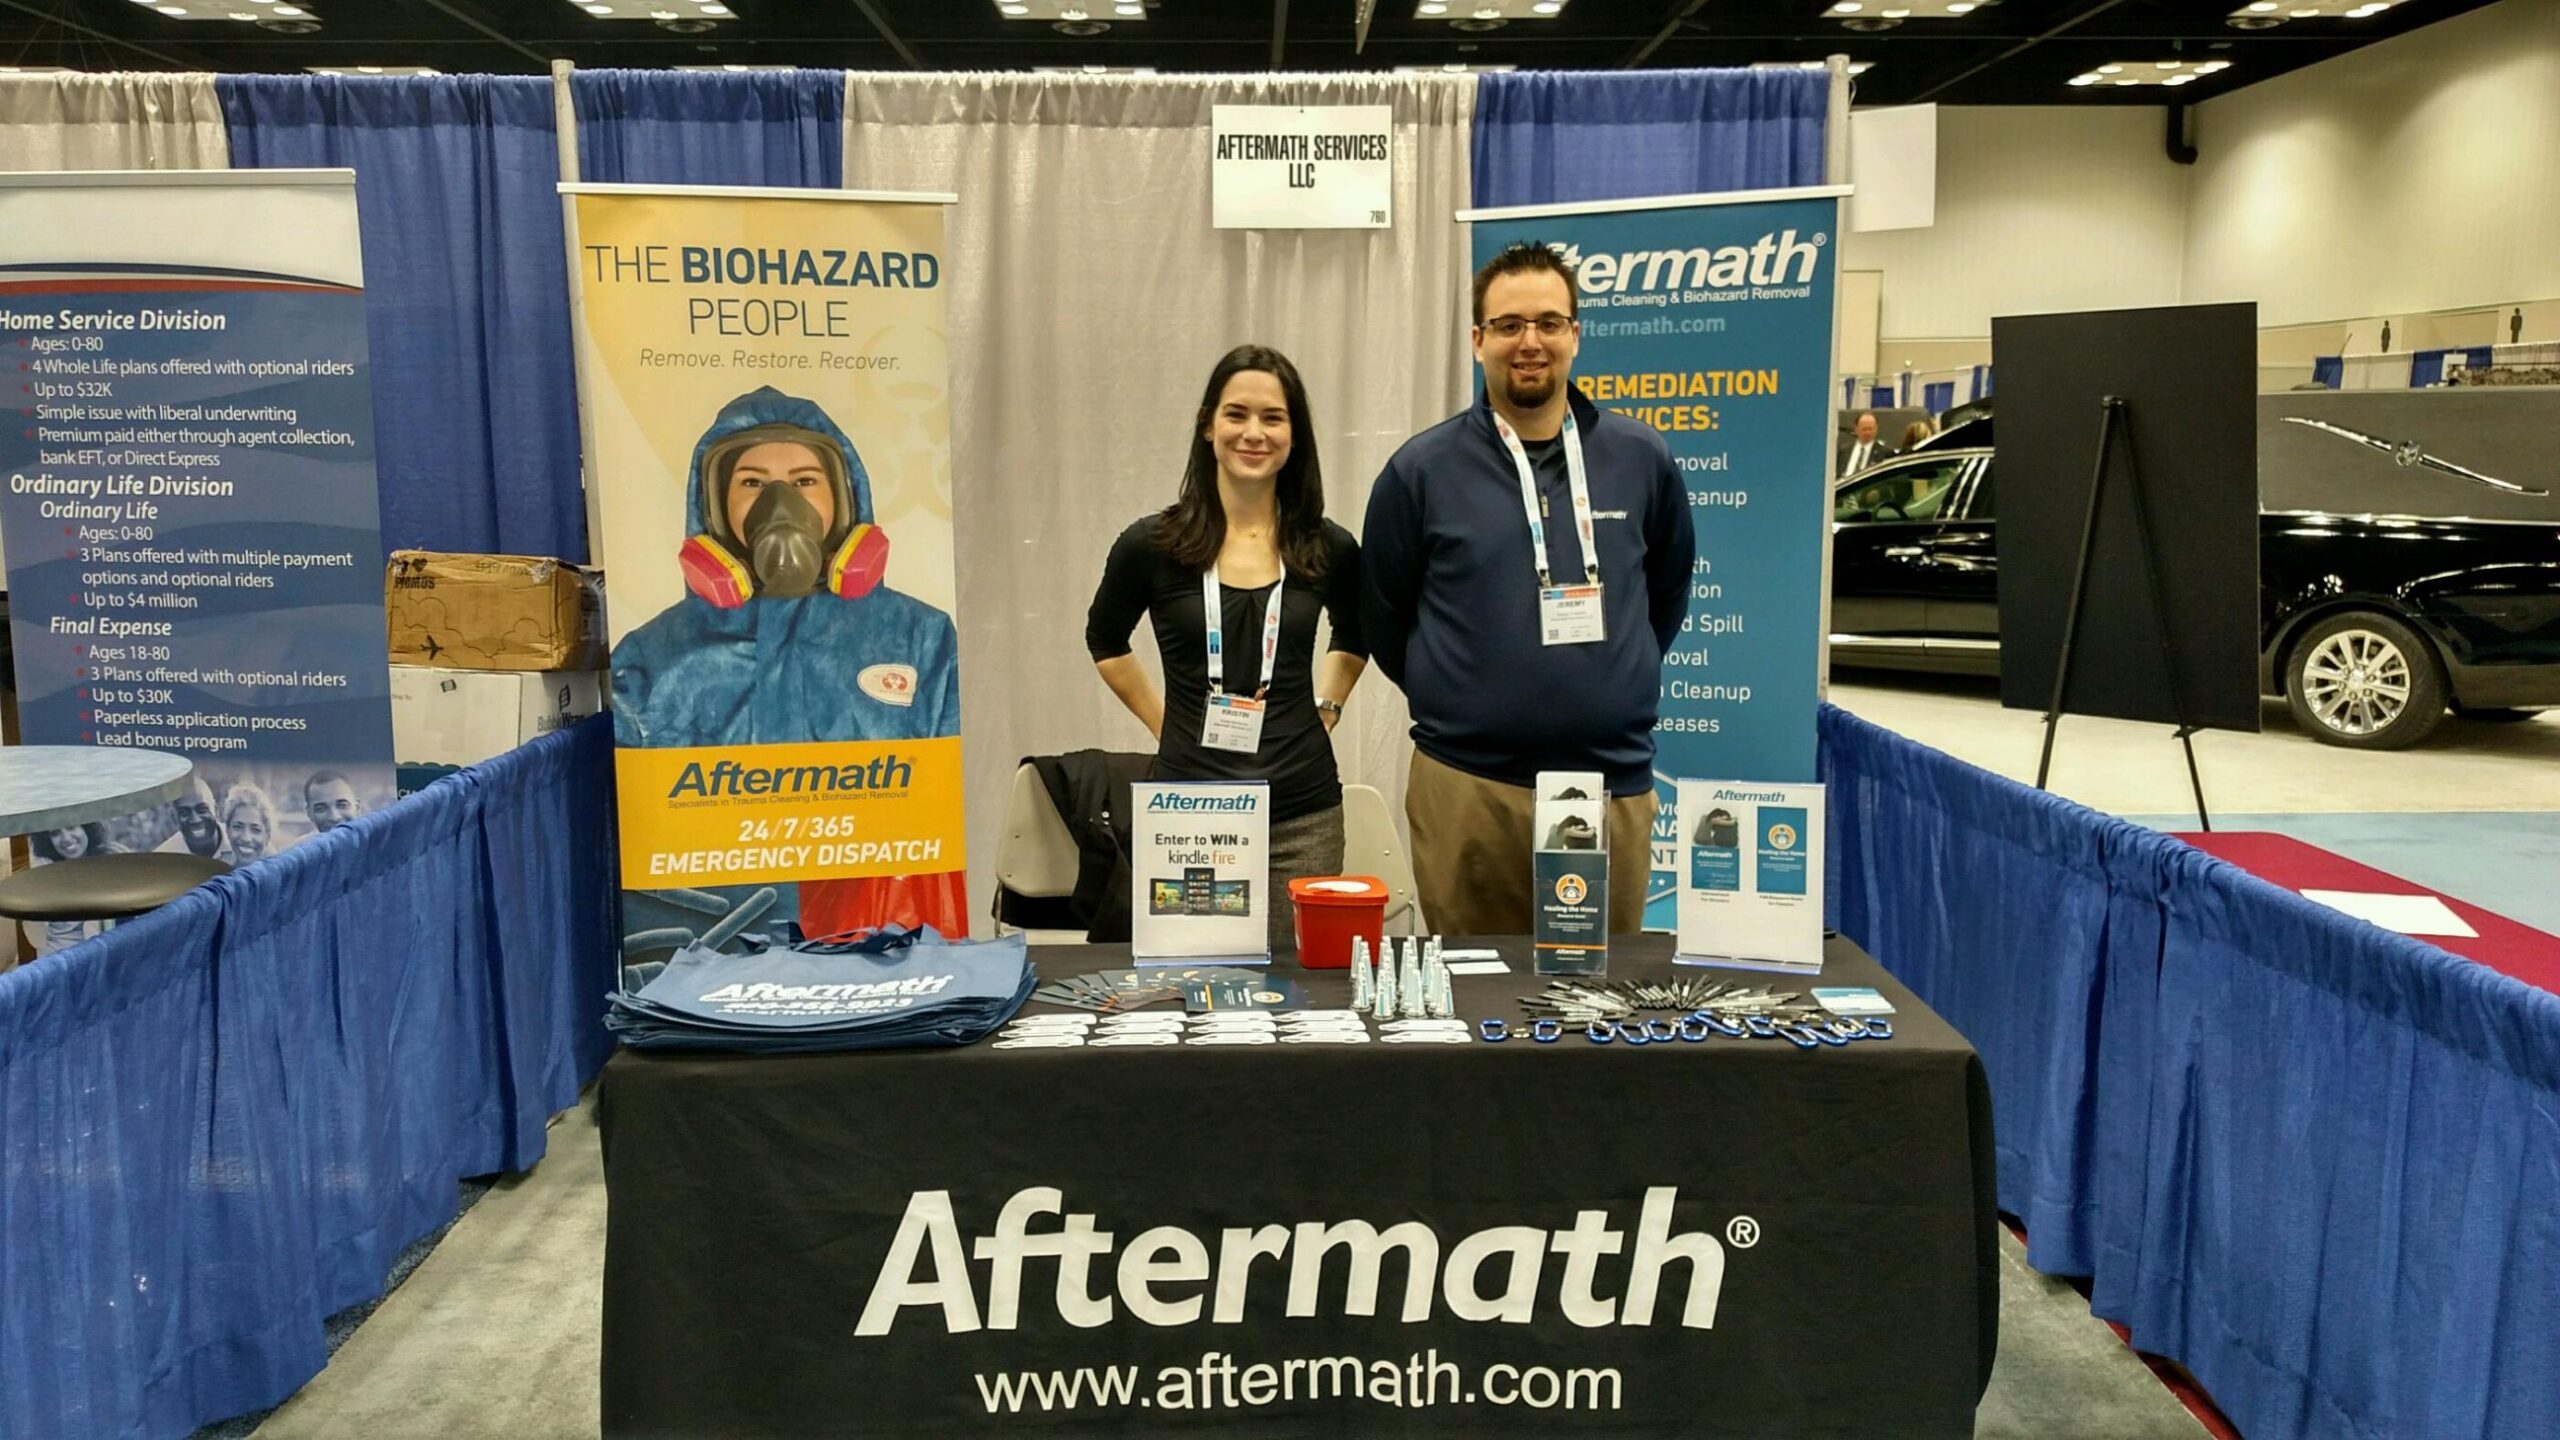 Aftermath booth at 2015 NFDA Conf.